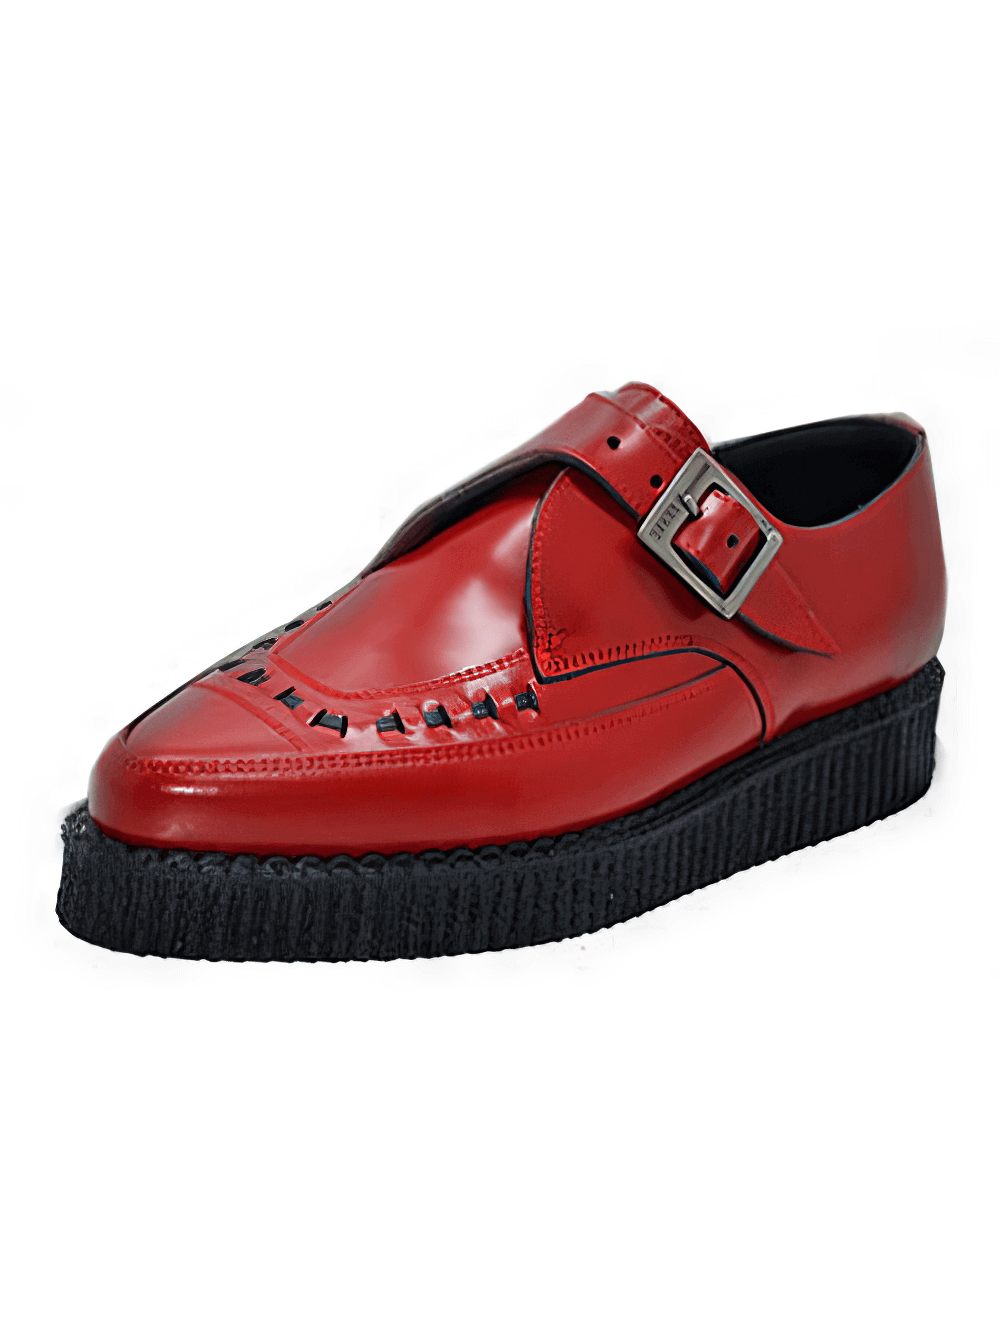 Unisex Pointed Creeper Shoe with Buckle Closure